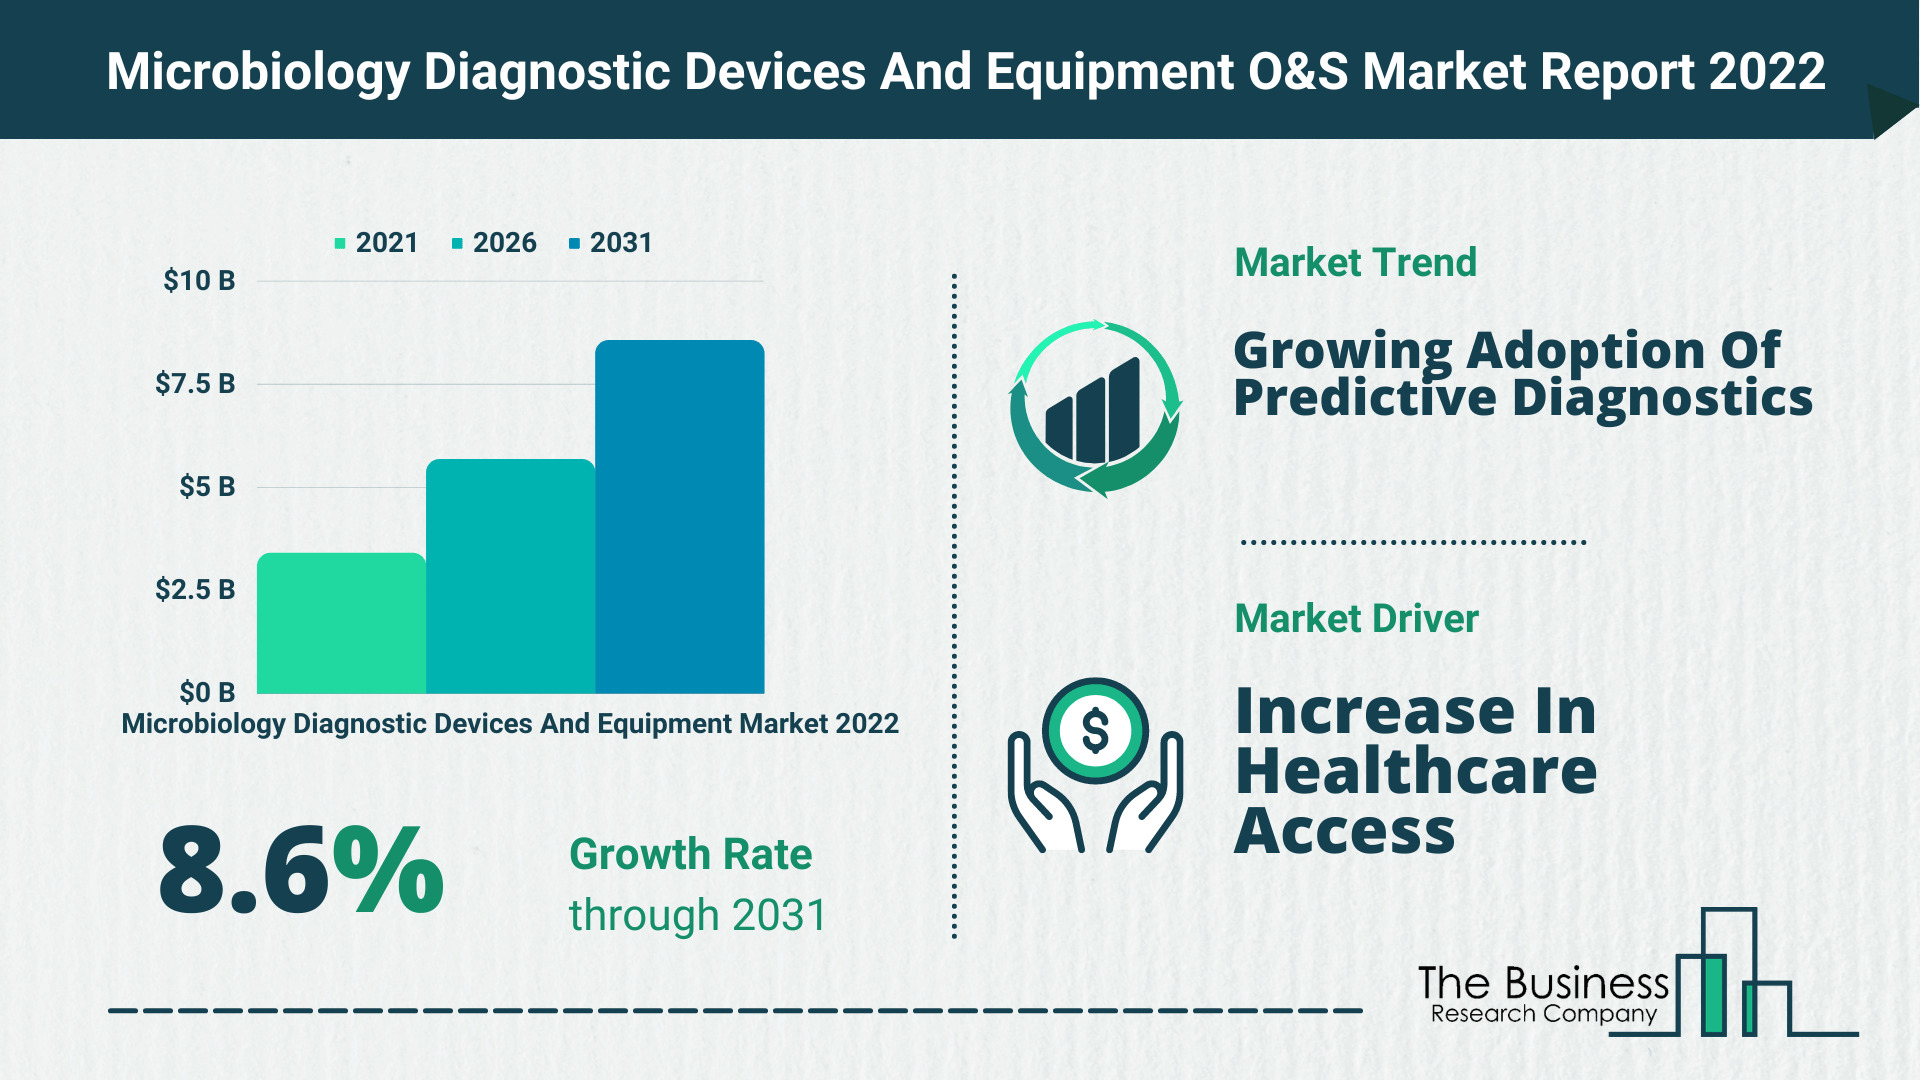 Global Microbiology Diagnostic Devices And Equipment Market 2022 – Market Opportunities And Strategies